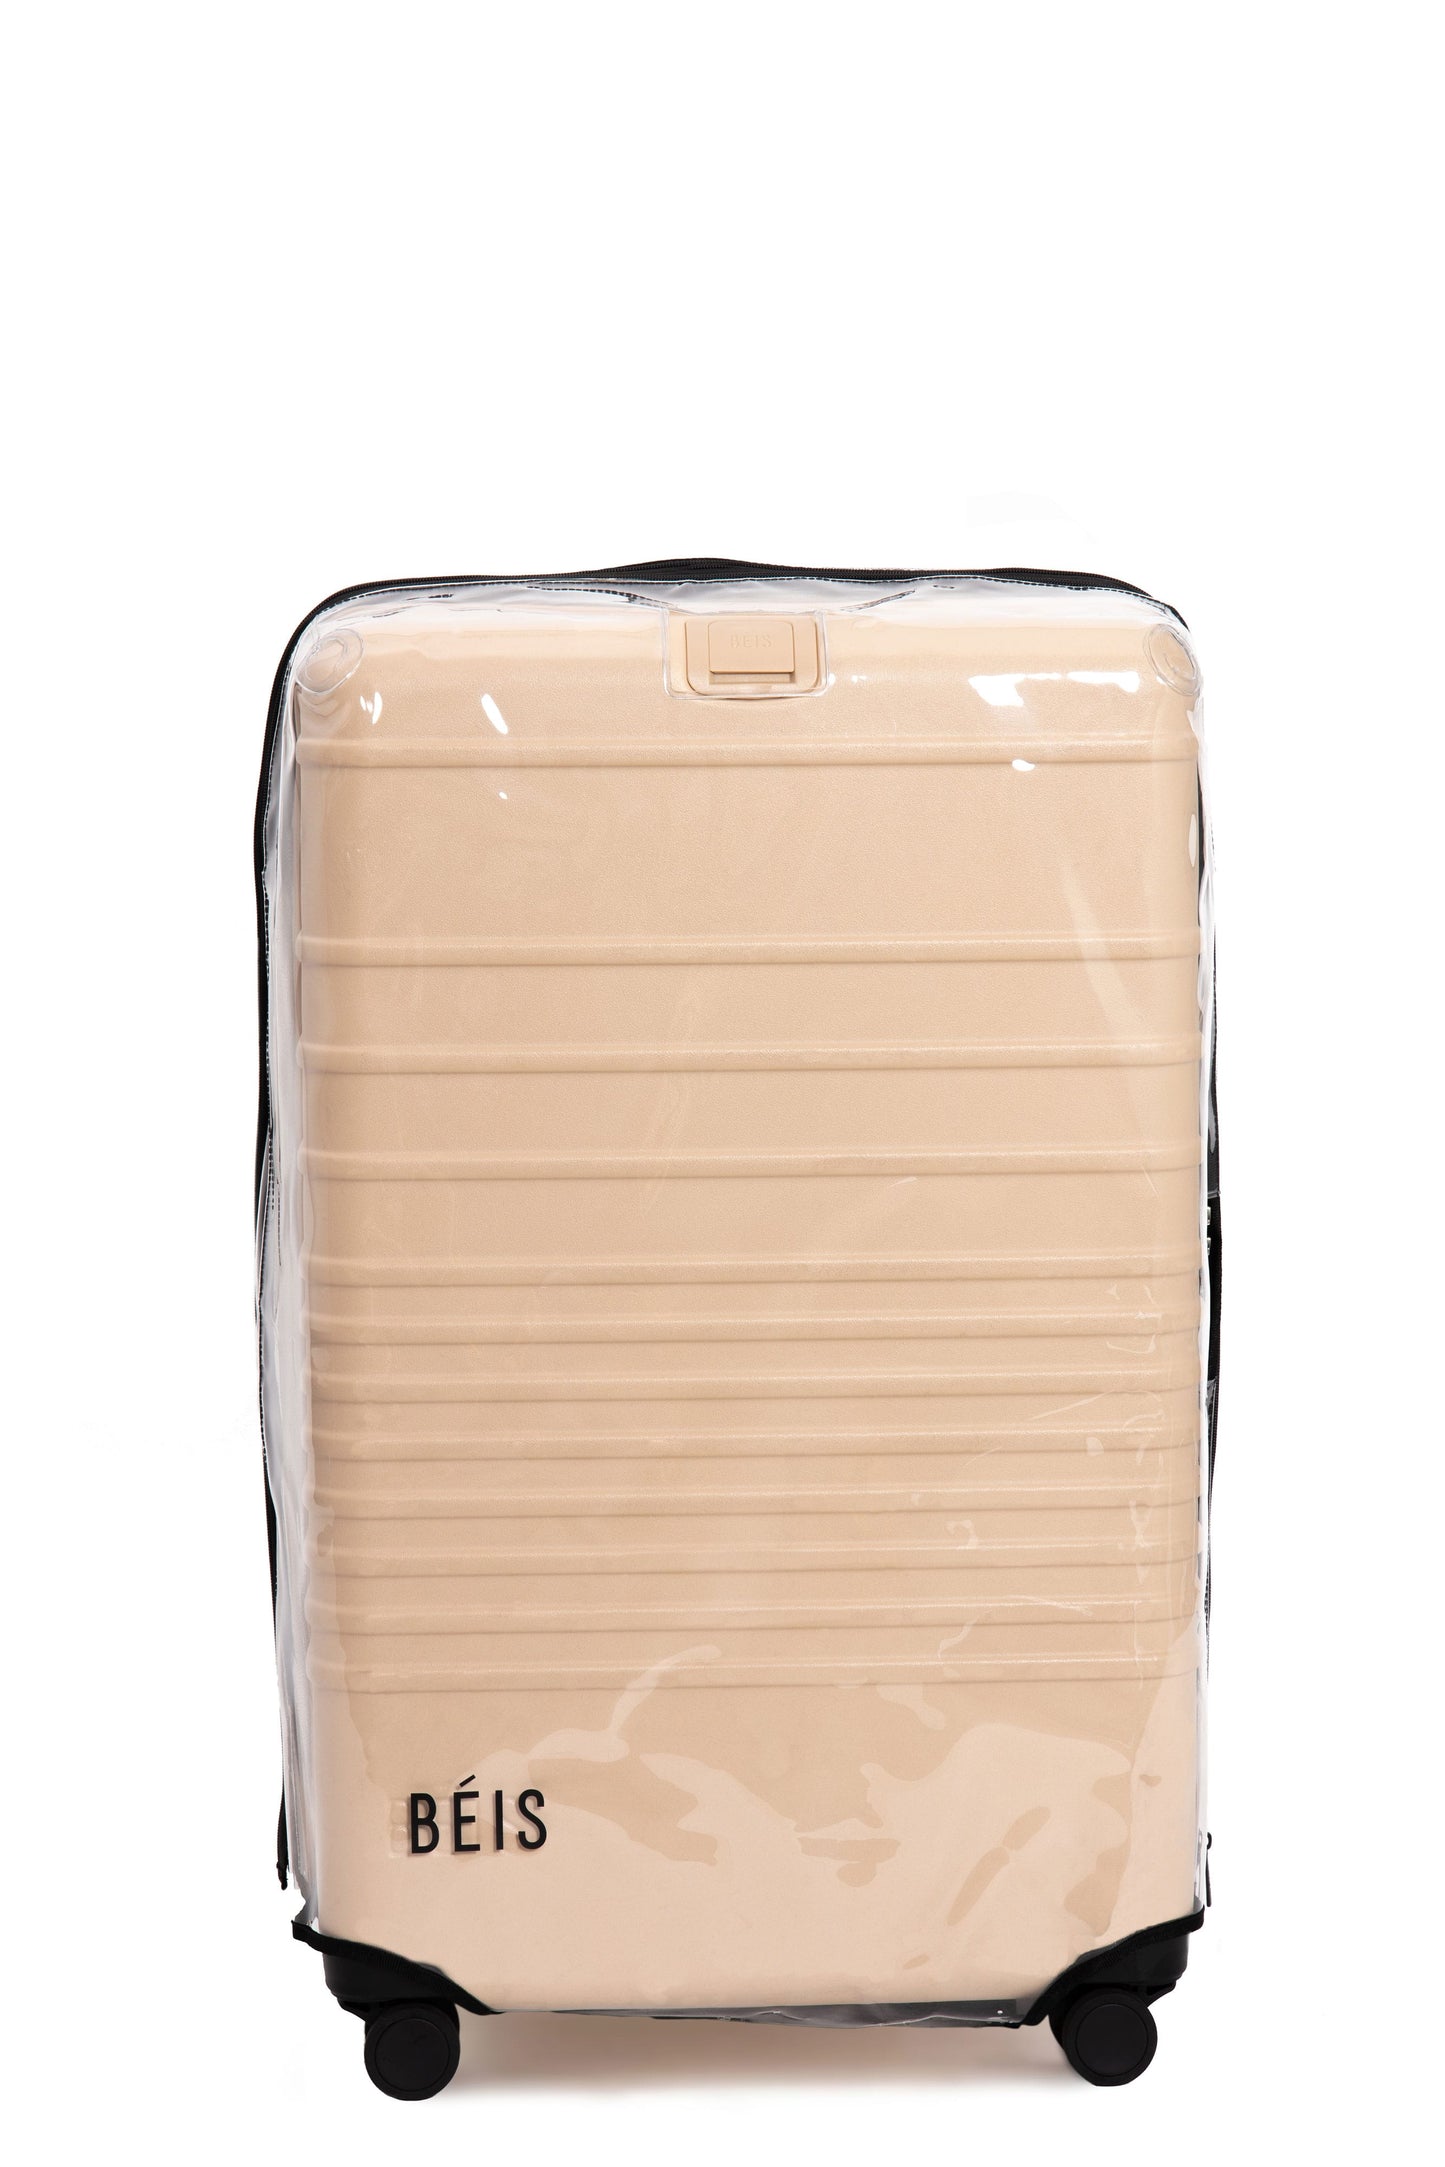 29" Large Luggage Cover Front